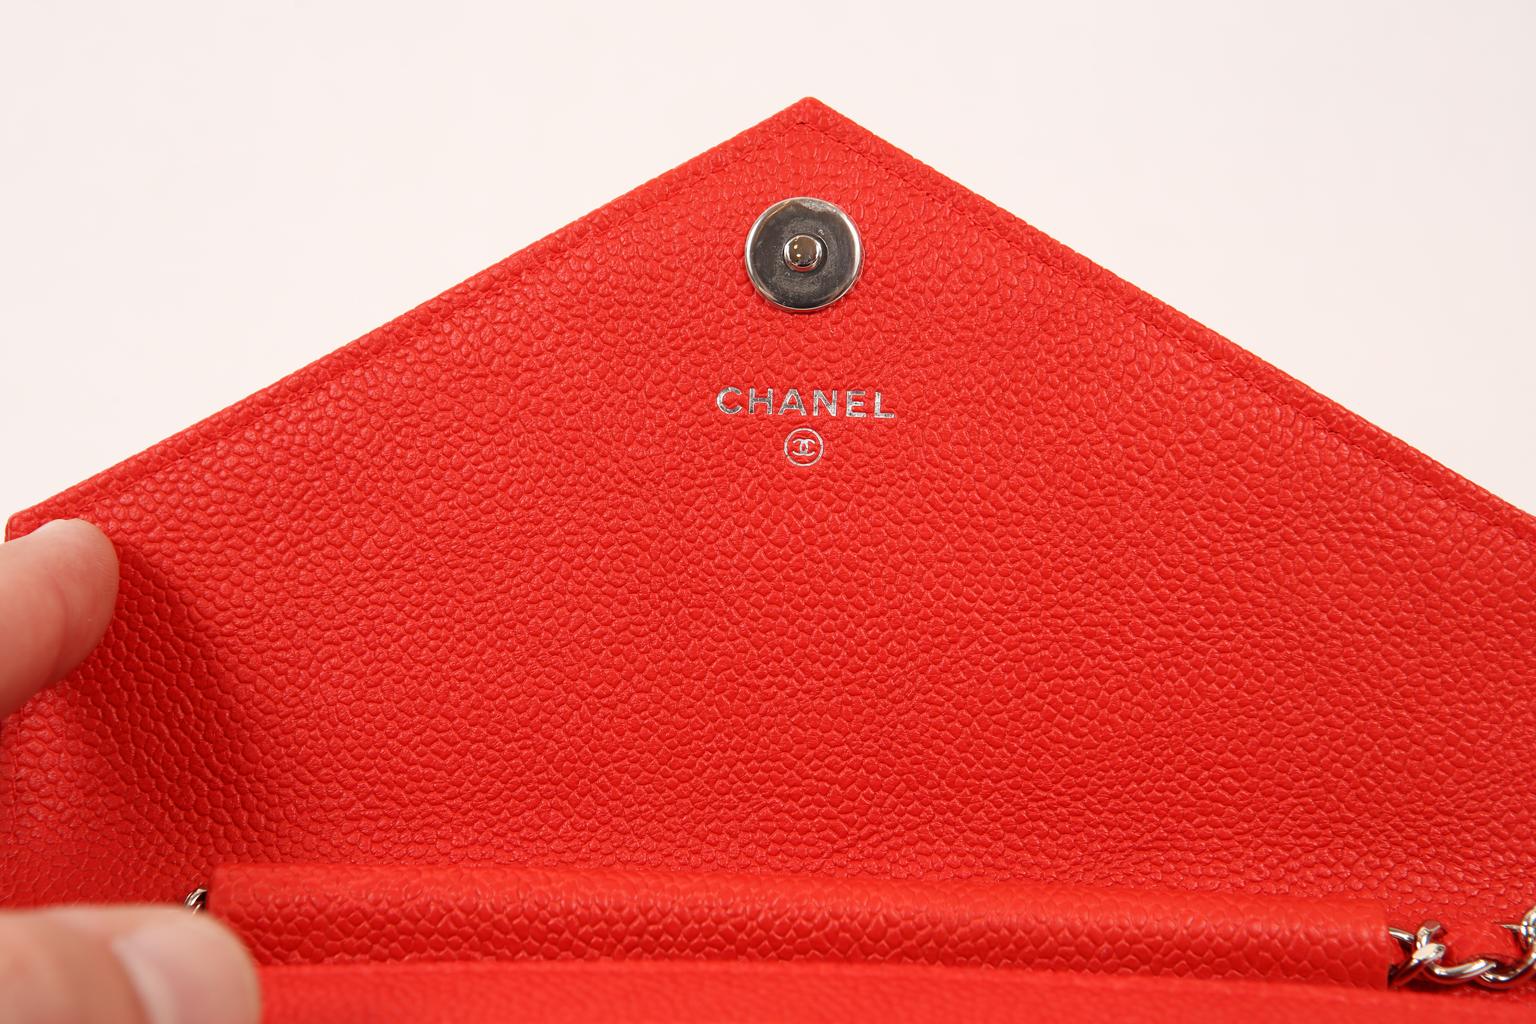 Chanel Red Caviar WOC Wallet on a Chain 5